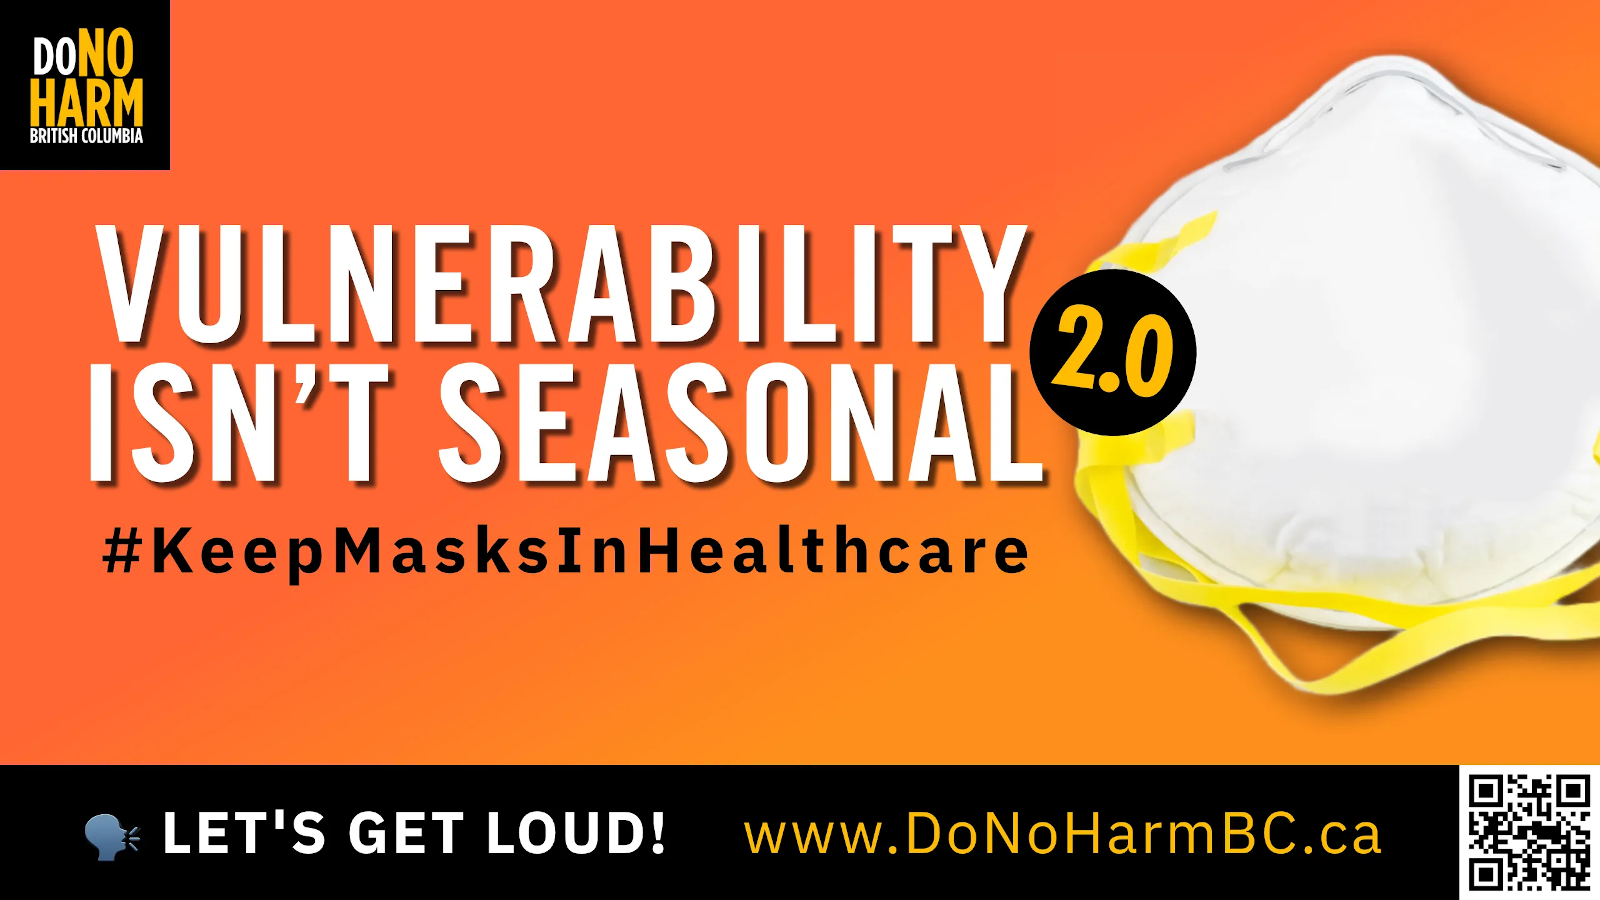 A white N95 mask with yellow head straps against an orange gradient background. White text reads, Vulnerability isn’t seasonal. #KeepMasksInHealthcare. Let’s get loud! www.DoNoHarmBC.ca